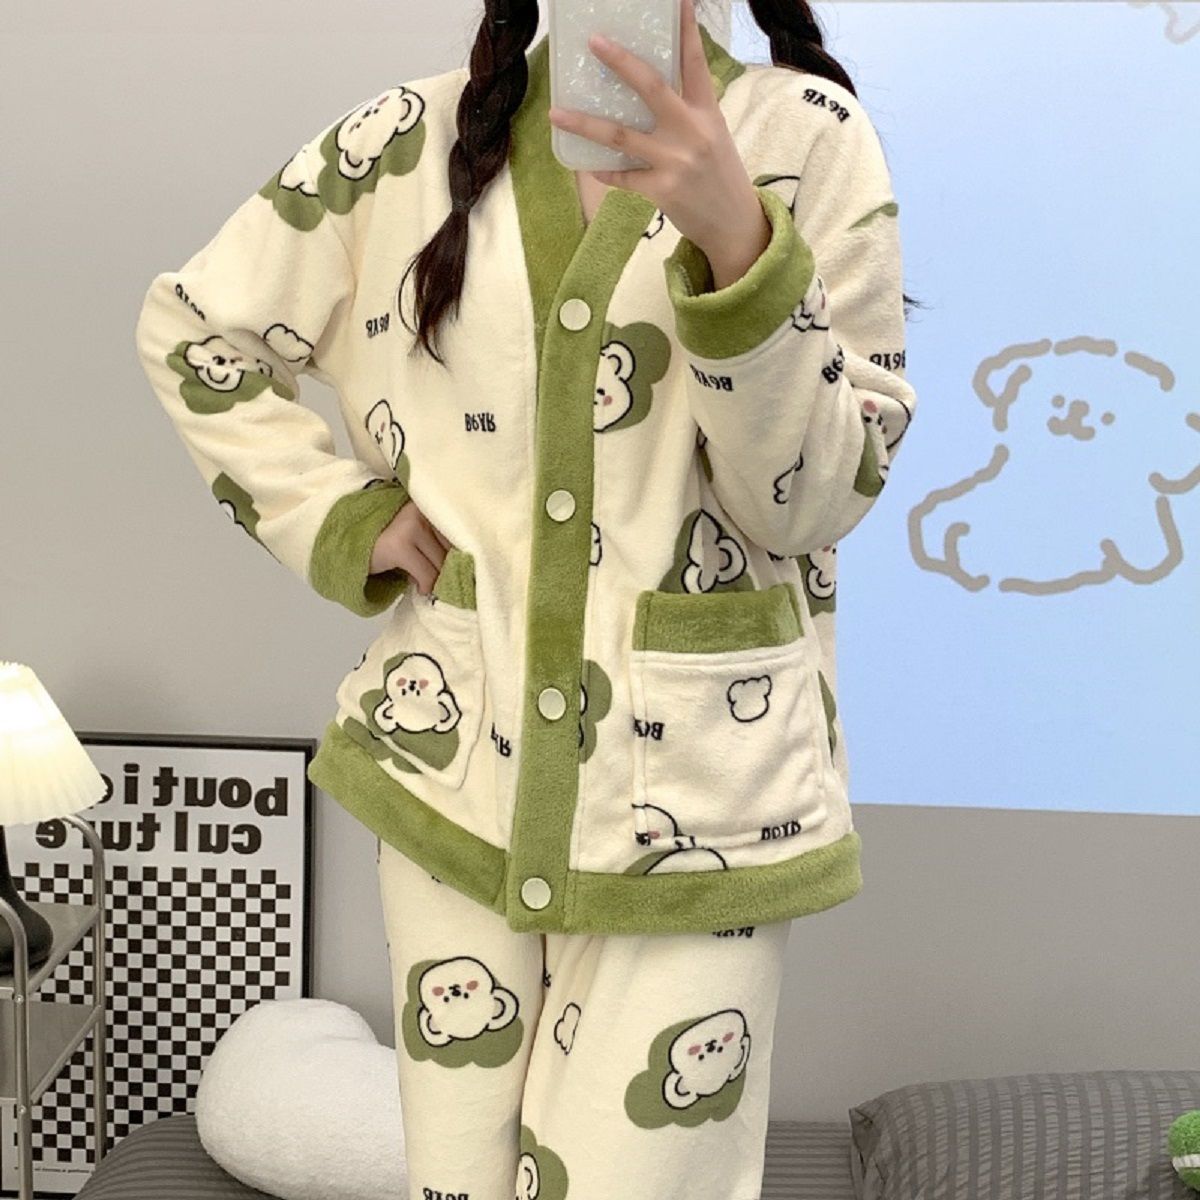 Coral fleece pajamas women's autumn and winter new cardigan small fragrant style thickened flannel cute cartoon can be worn outside home clothes